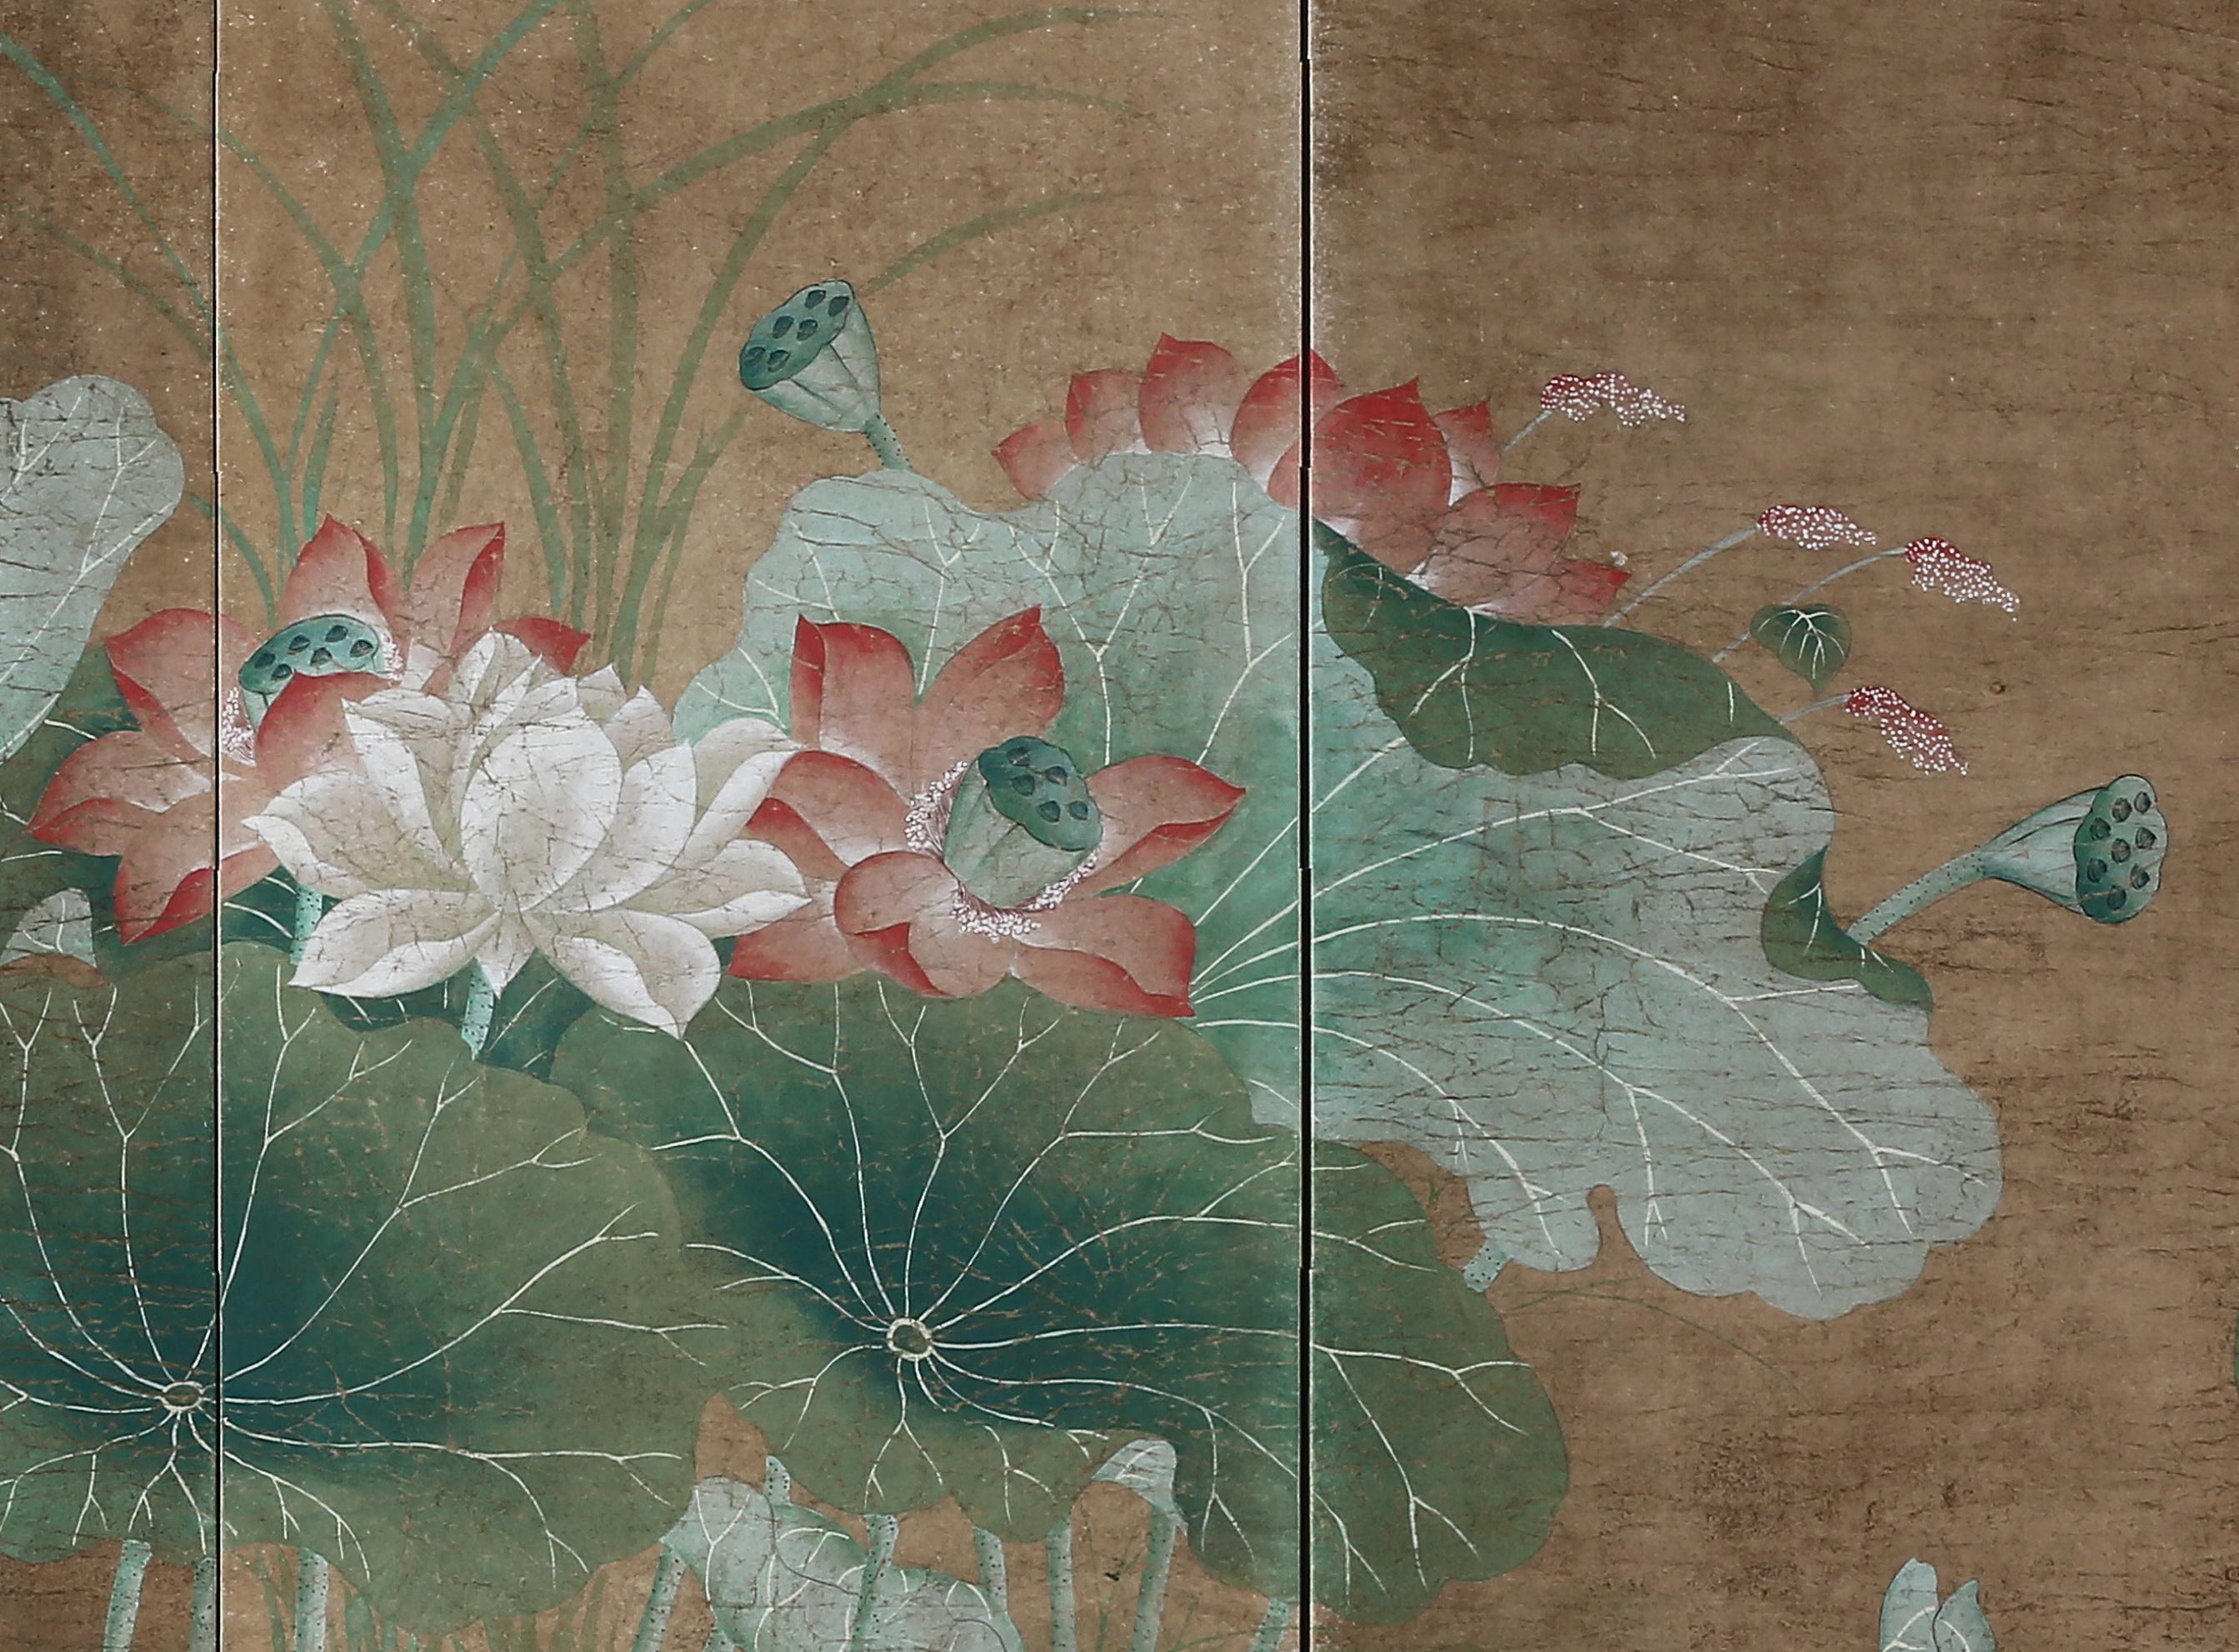 The lotus pond and mandarin ducks painting of this four-panel screen is hand painted in watercolor, on rice paper over carefully jointed wooden lattice frames. Lacquer rails are then applied to the perimeter to finish the edges of the screen and